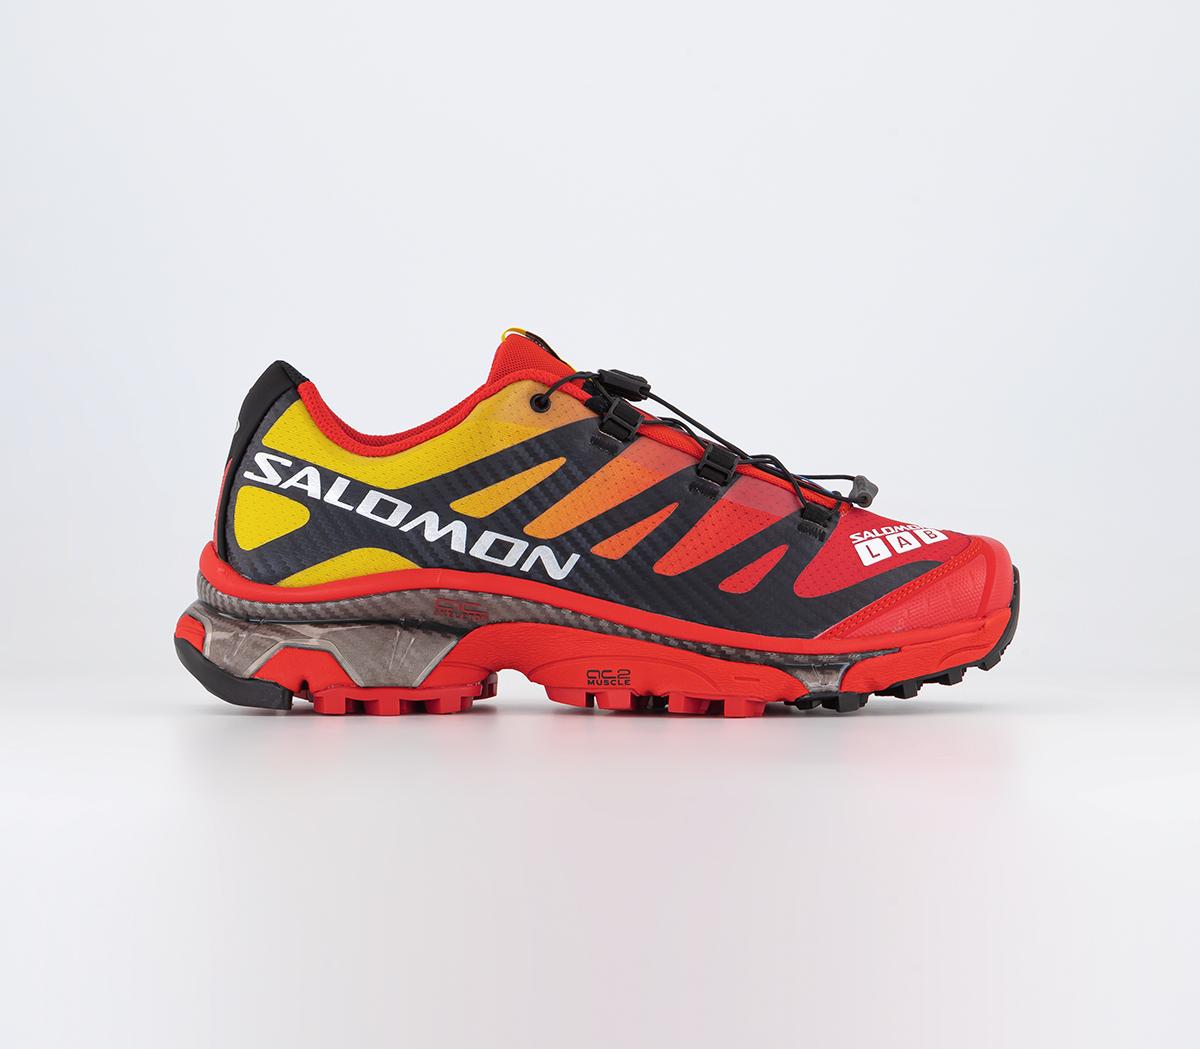 SalomonXt-4 Trainers Og Fiery Red Black Yellow